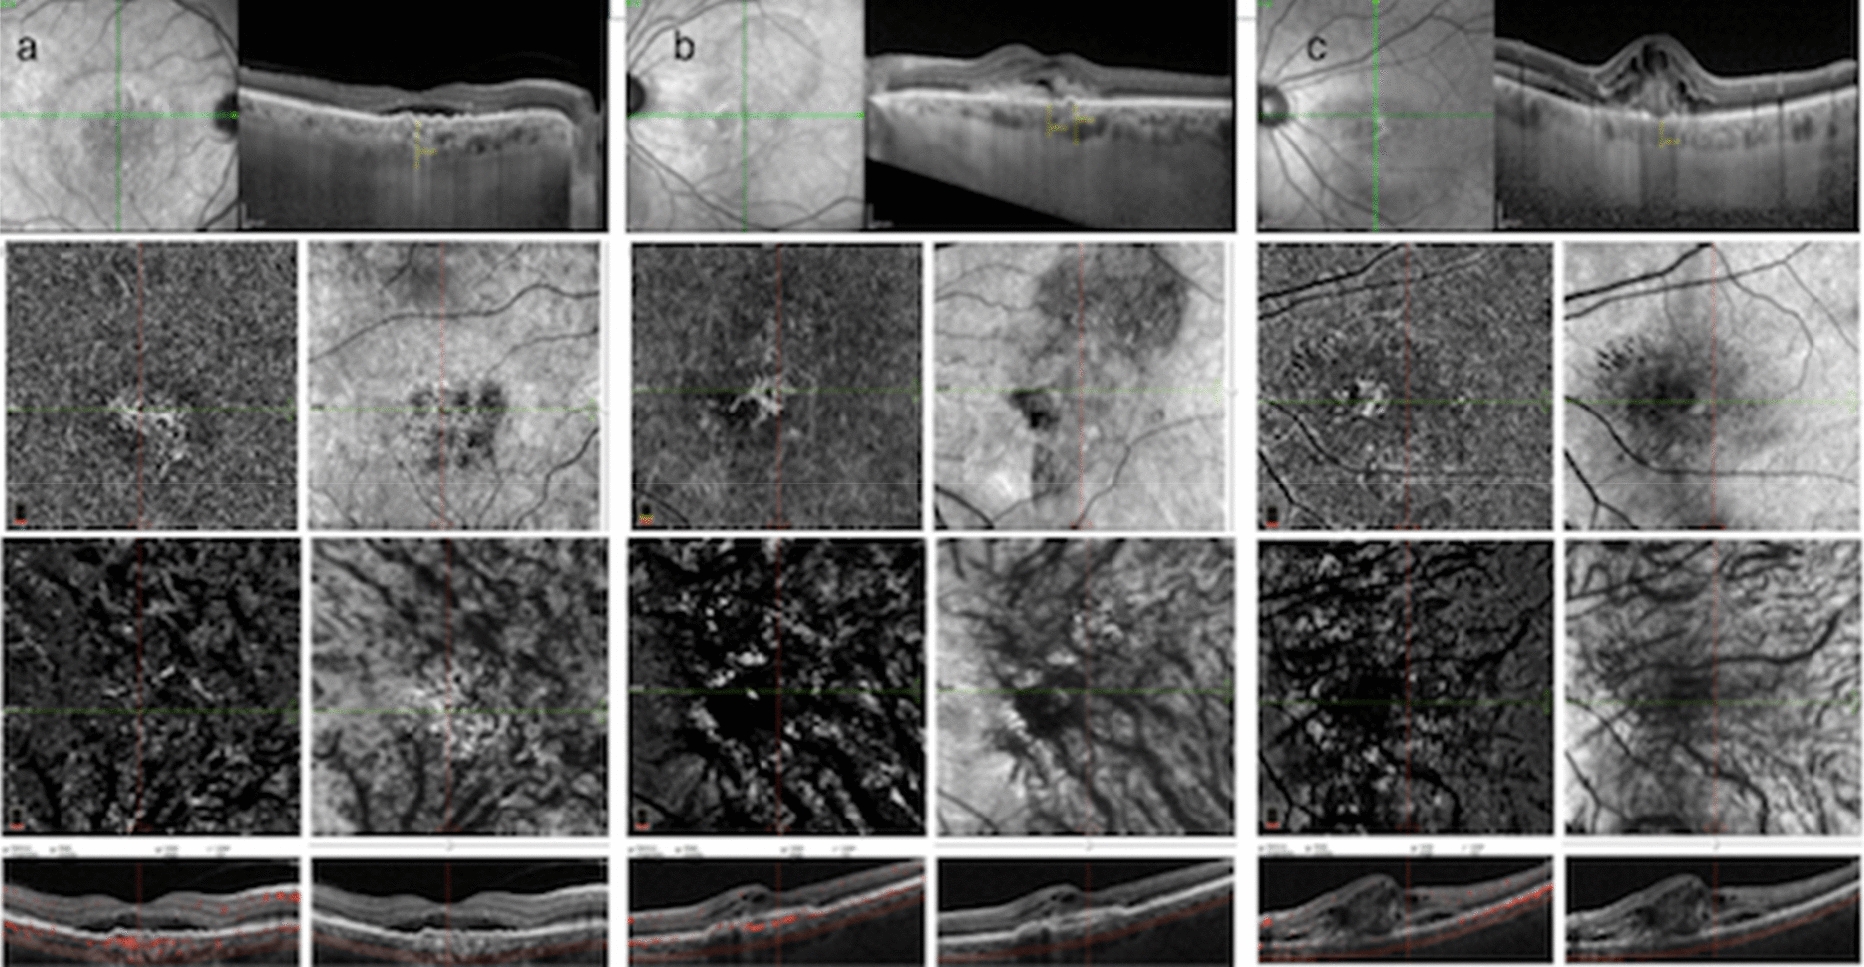 Pro re nata anti-VEGF treatment in pachychoroid neovasculopathy compared with age-related macular degeneration based on optical coherence tomography